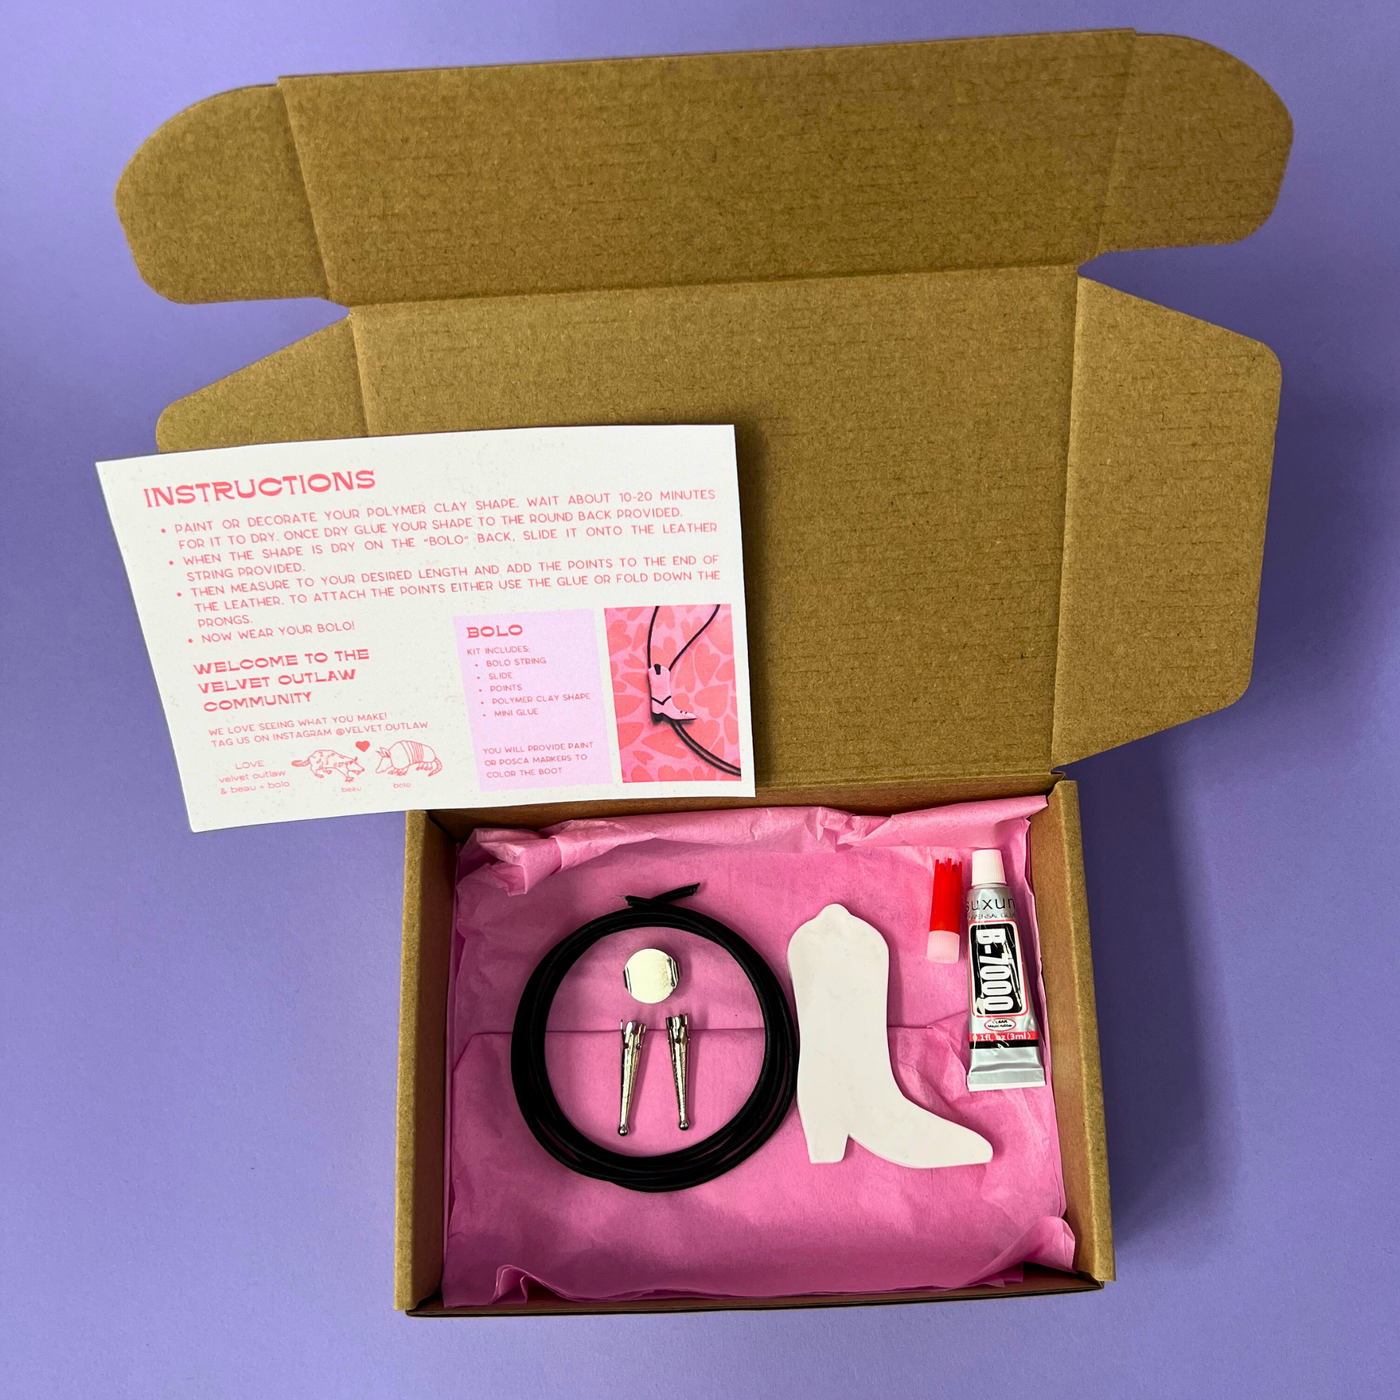 Bow and Bolo DIY Kit